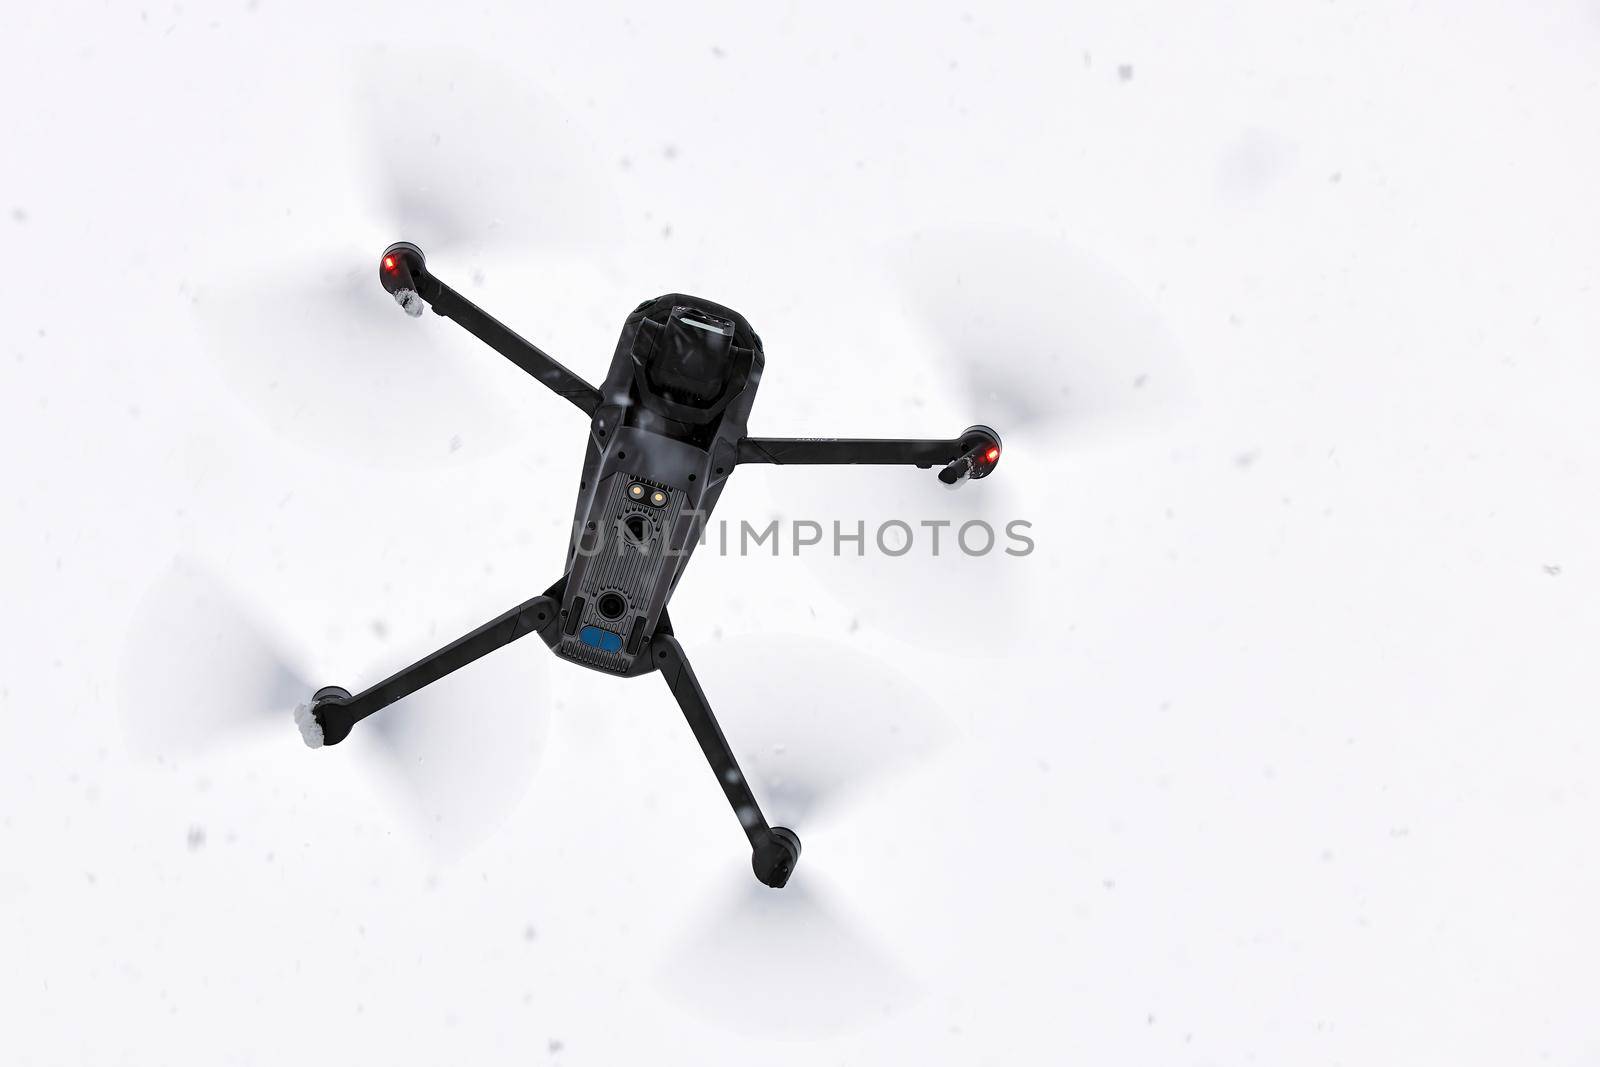 New DJI Mavic 3 bottom view, flying in snow conditions. DJI Mavic 3 one of the most portable drones in the market, with Hasselblad camera. 25.01.2022 Rostov-on-Don, Russia by EvgeniyQW